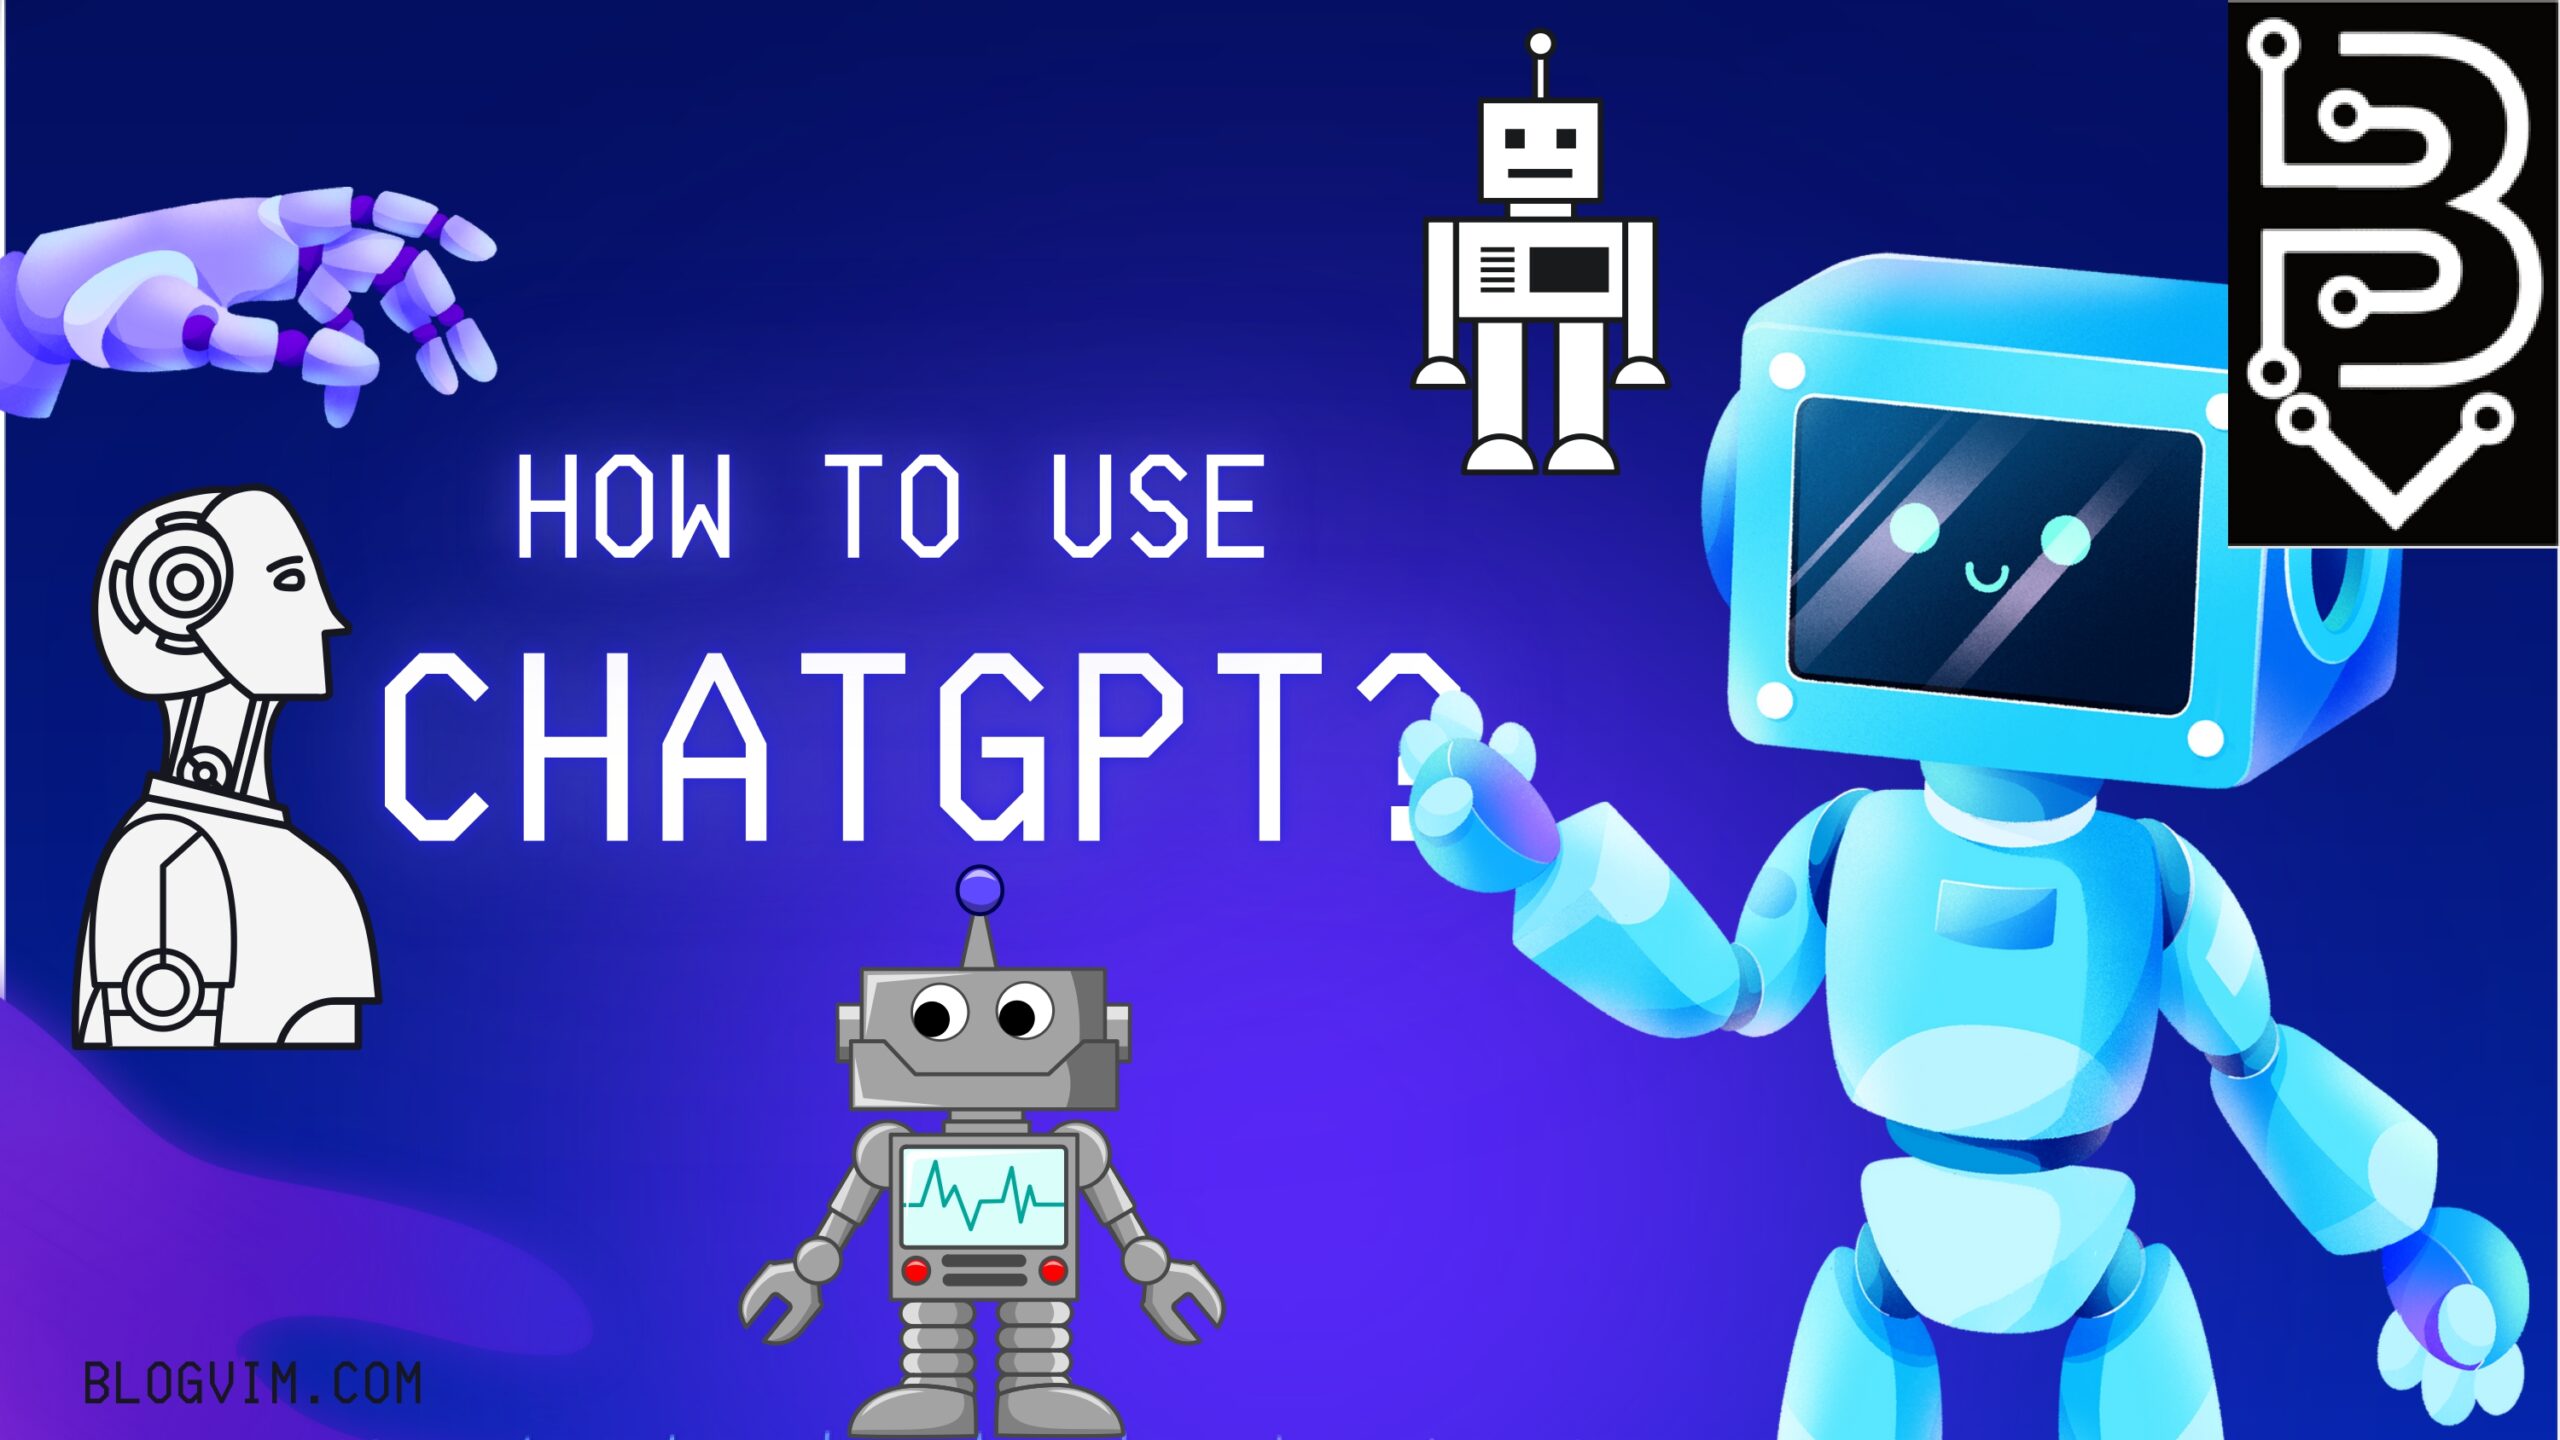 How To Use ChatGPT?